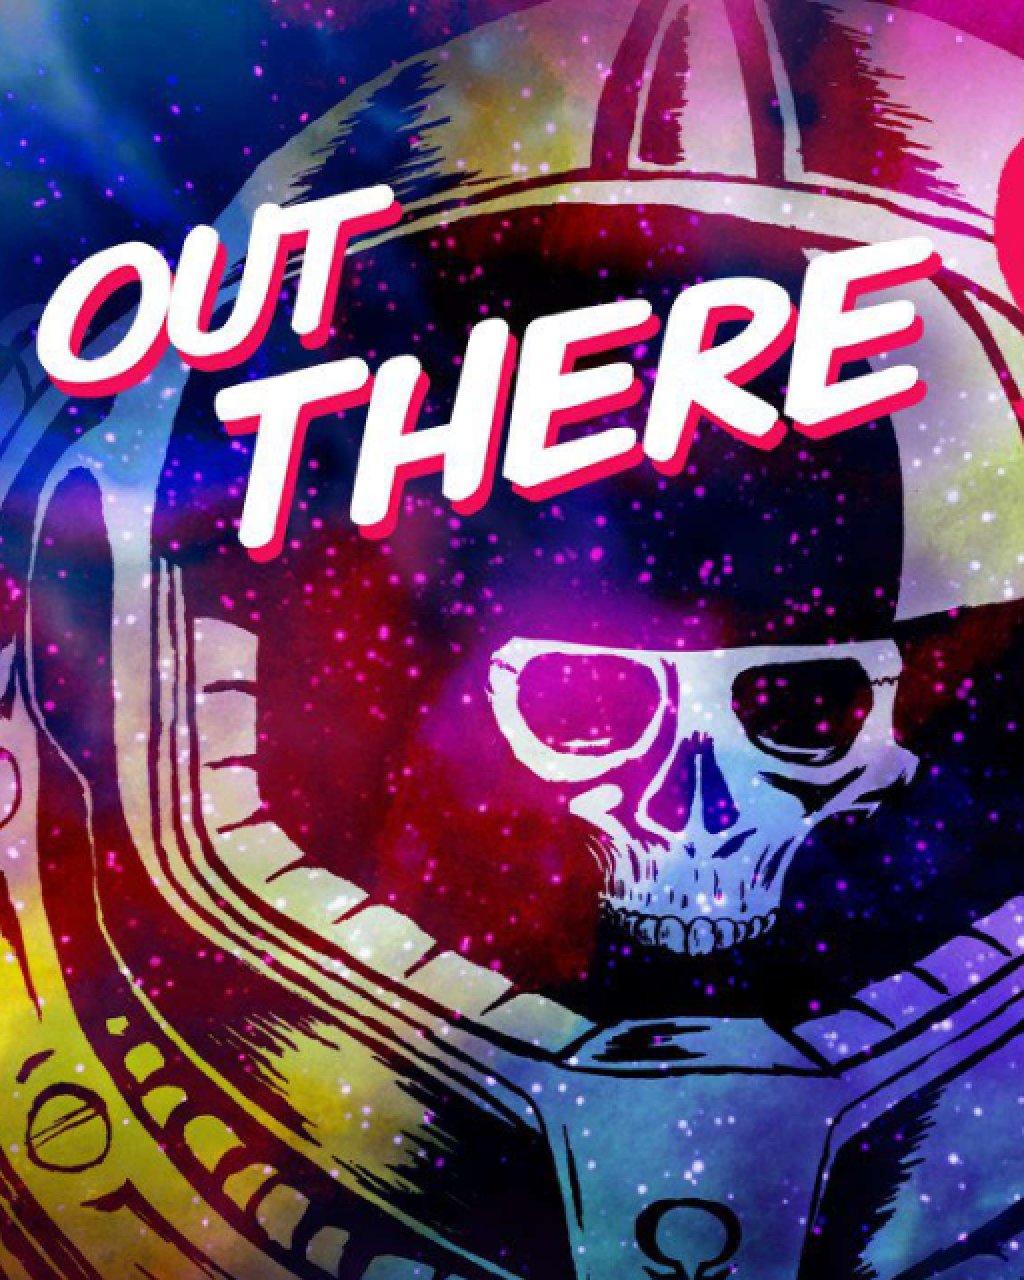 Out There Omega Edition